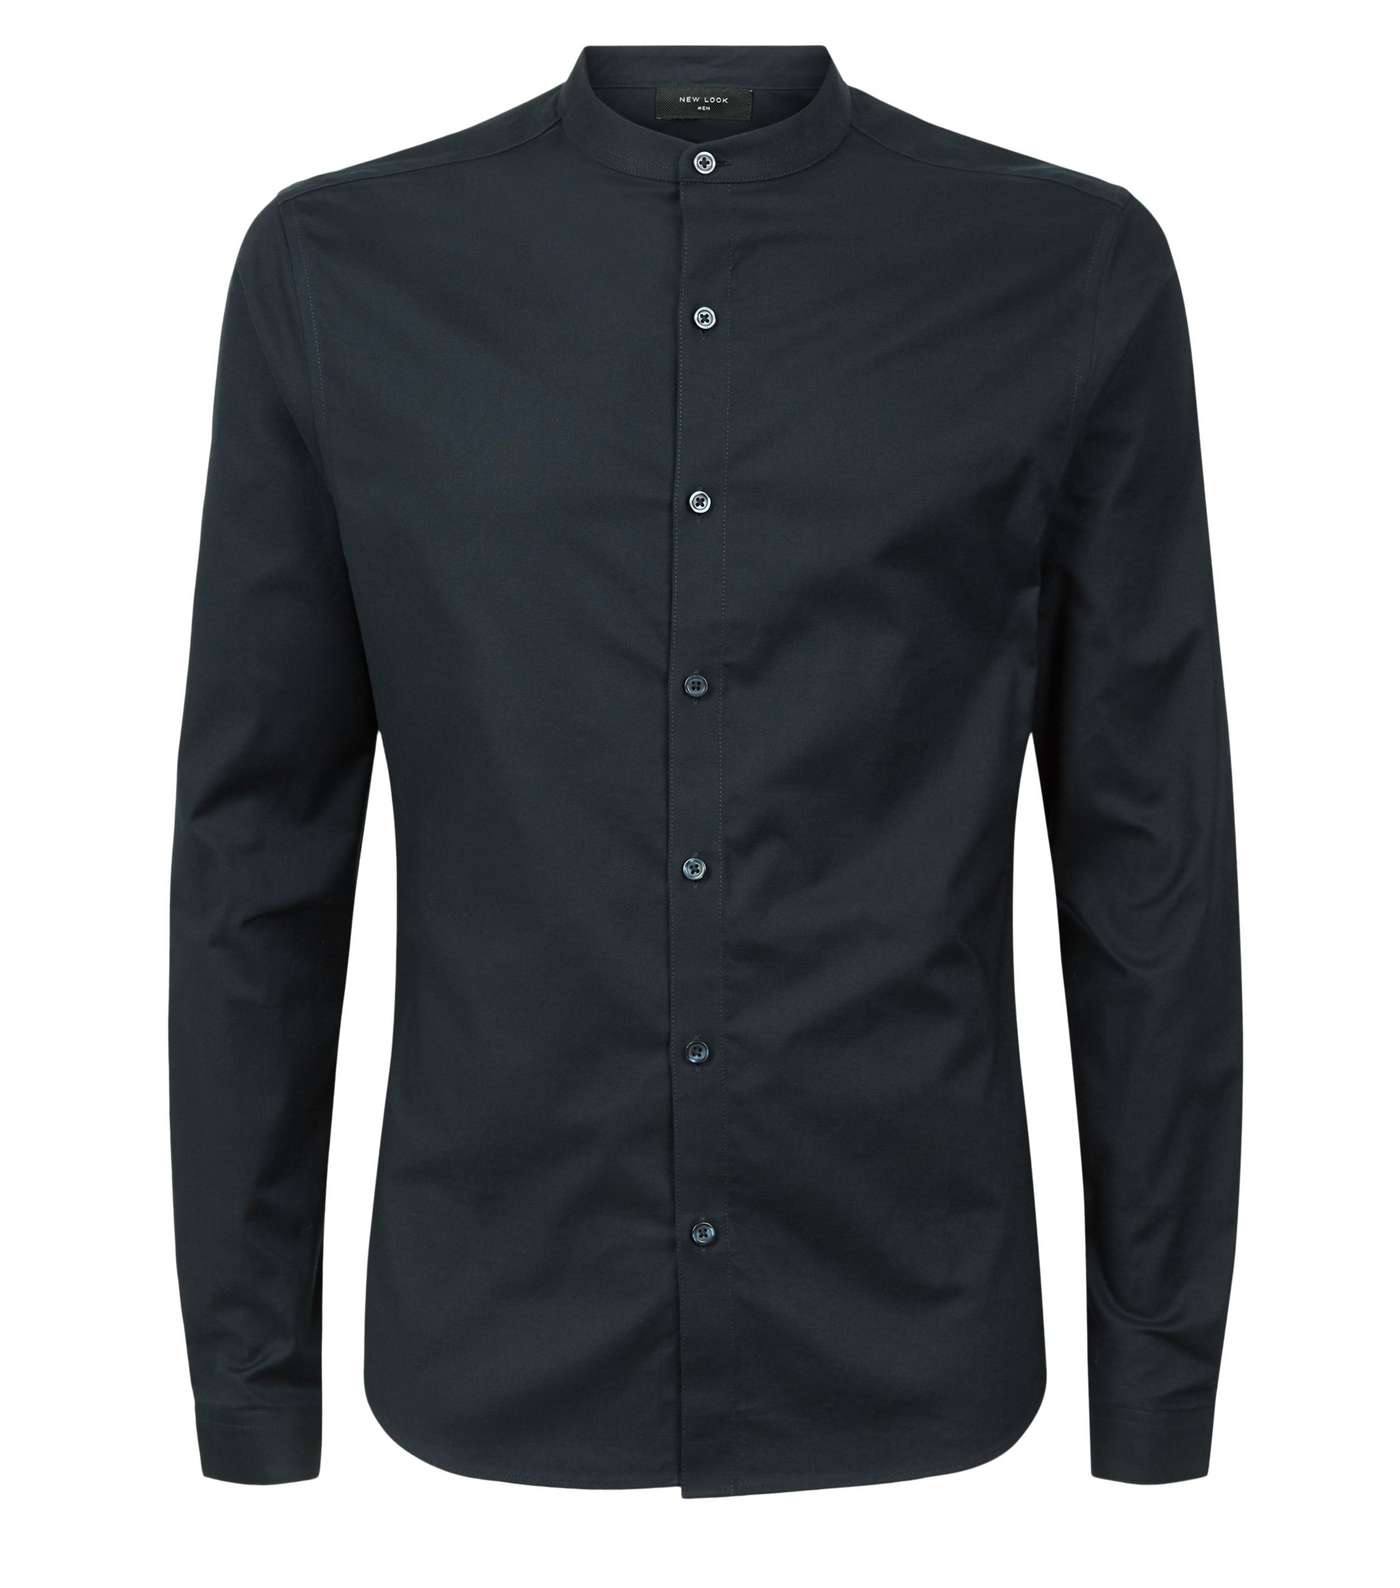 Navy Muscle Fit Grandad Oxford Shirt Image 4